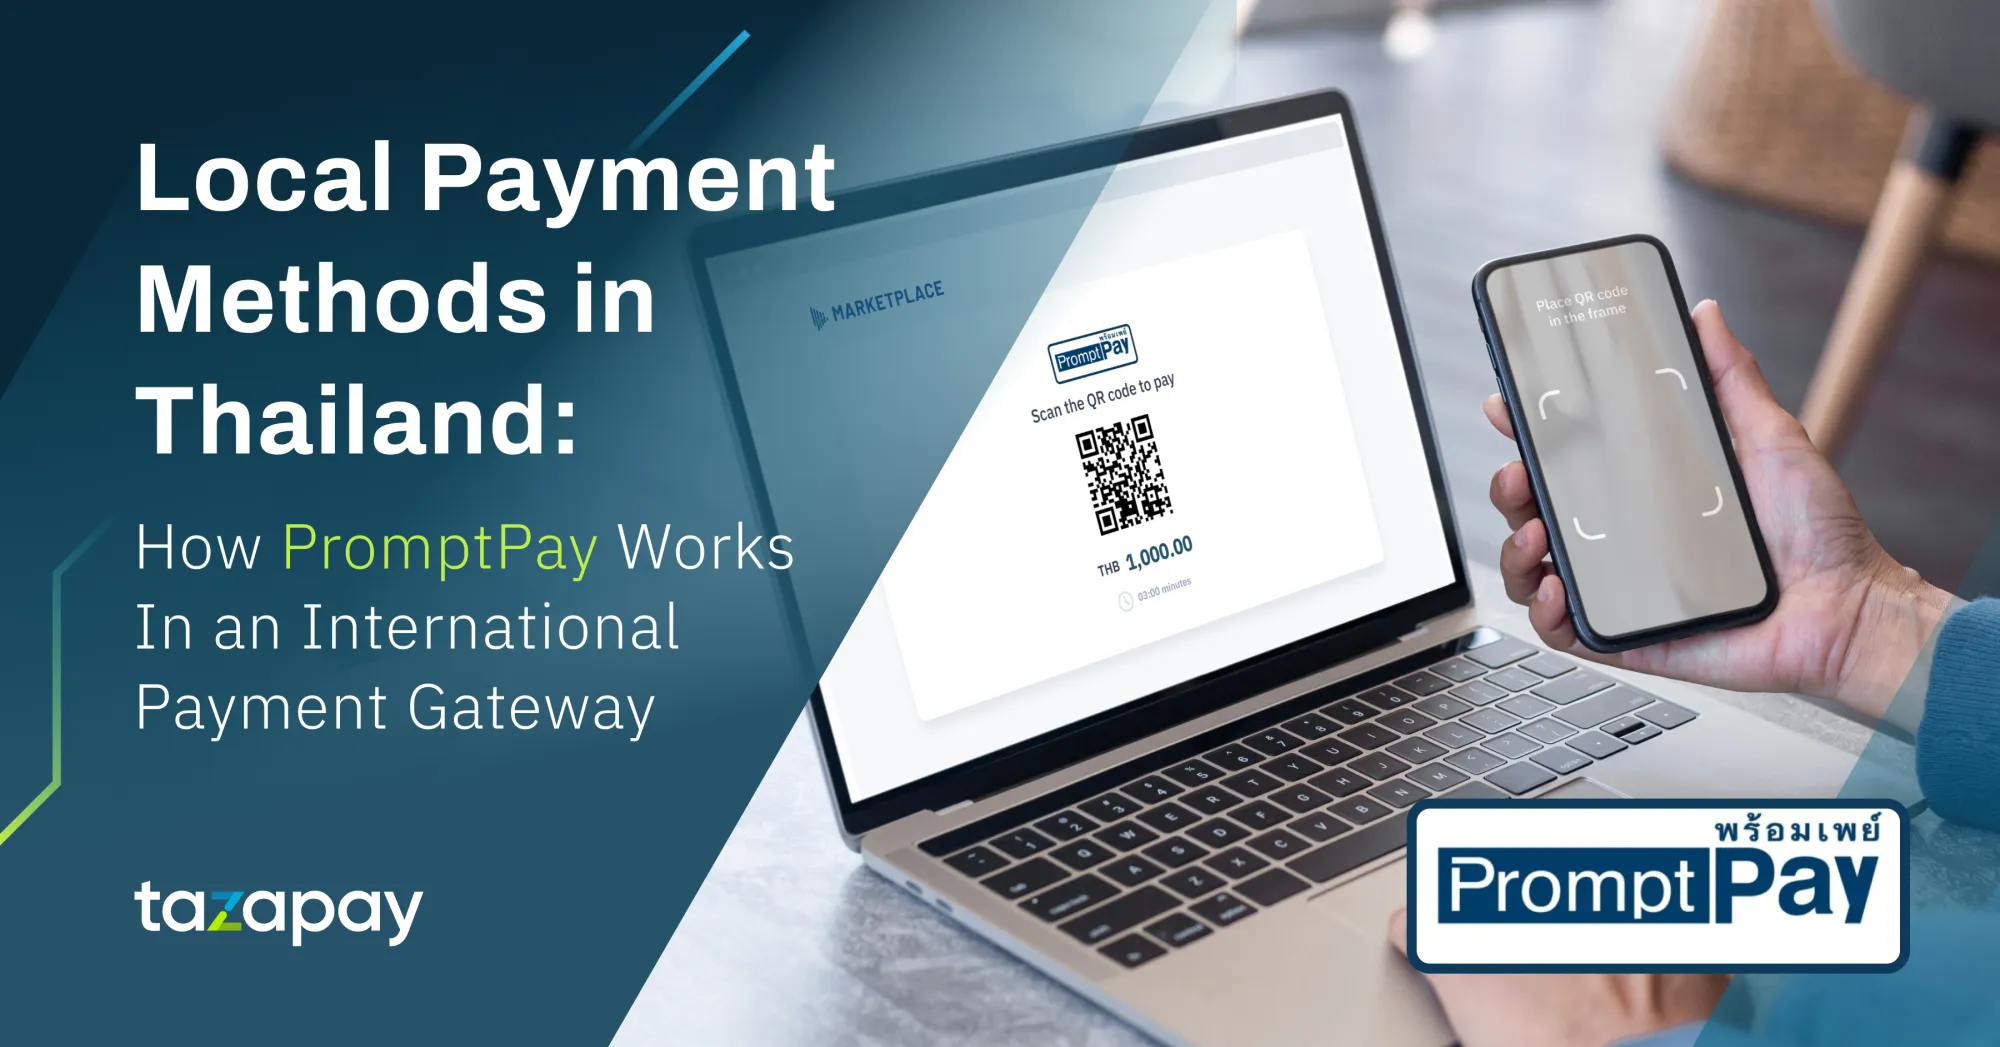 Local Payment Methods in Thailand: How PromptPay Works In an International Payment Gateway